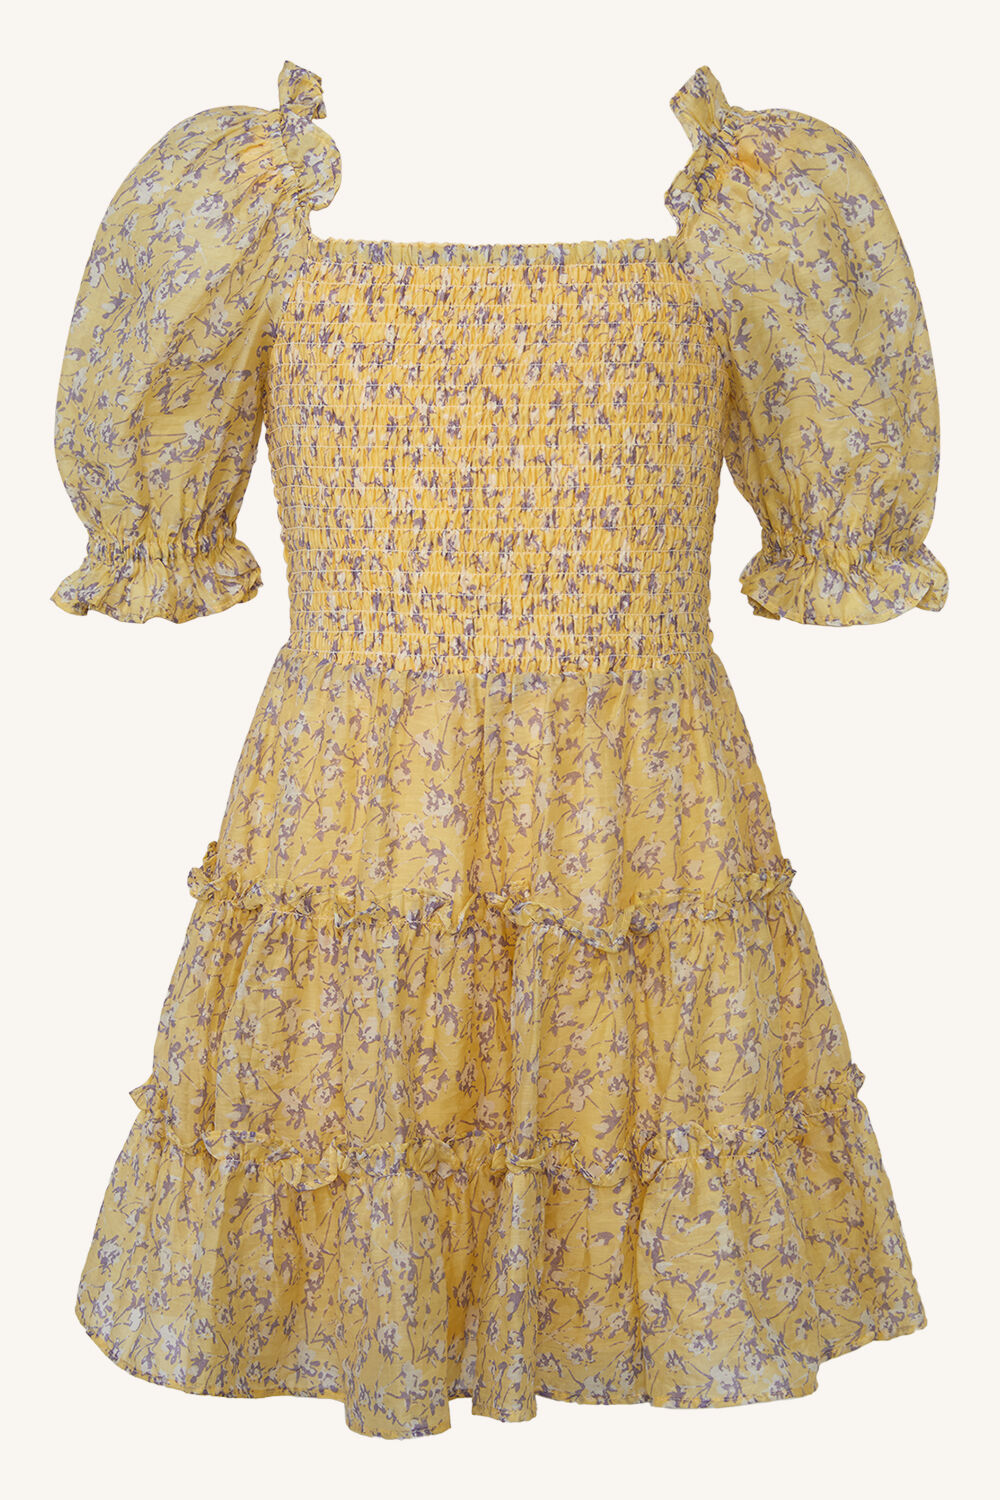 GIRLS TIERED FLORAL DRESS in colour PASTEL YELLOW